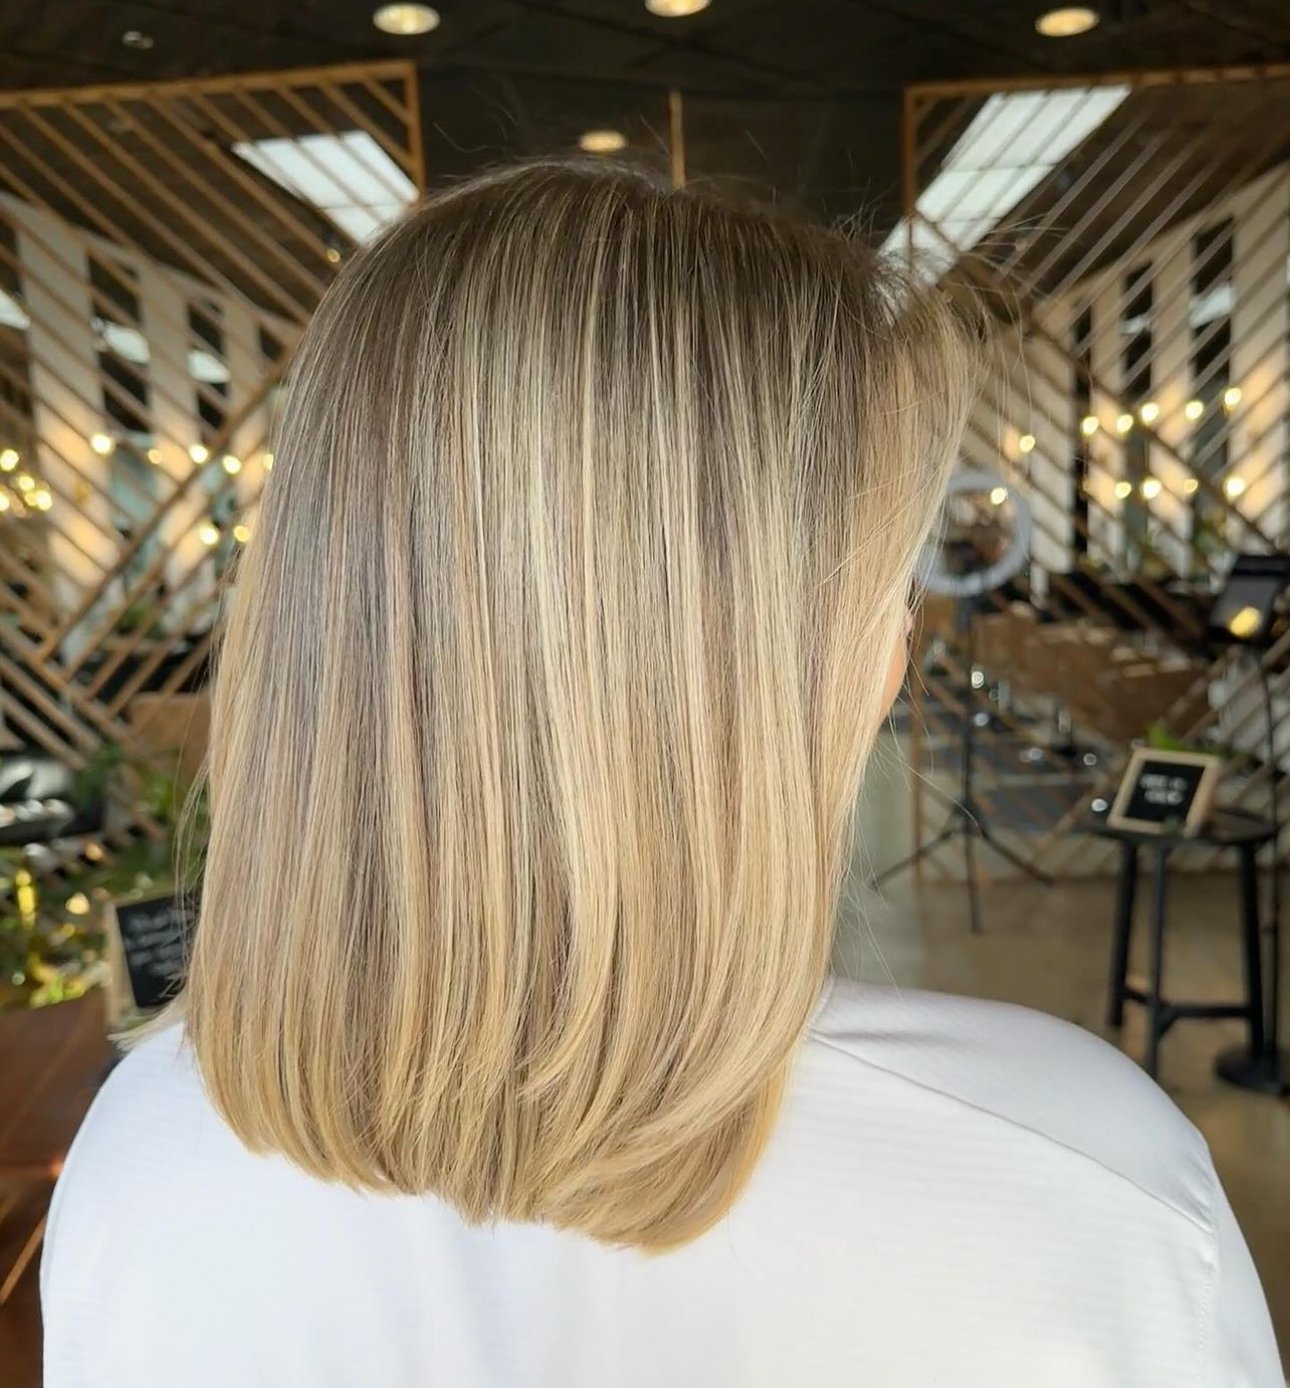 We obviously have a thing for blondes 😉

Ready to get your look spring ready? Well then it's time to get on Kelsi's books.

You can snag a spot on her schedule with the online booking link in our bio ⚡

#raleighblondes #raleighhair #raleighcolorspec